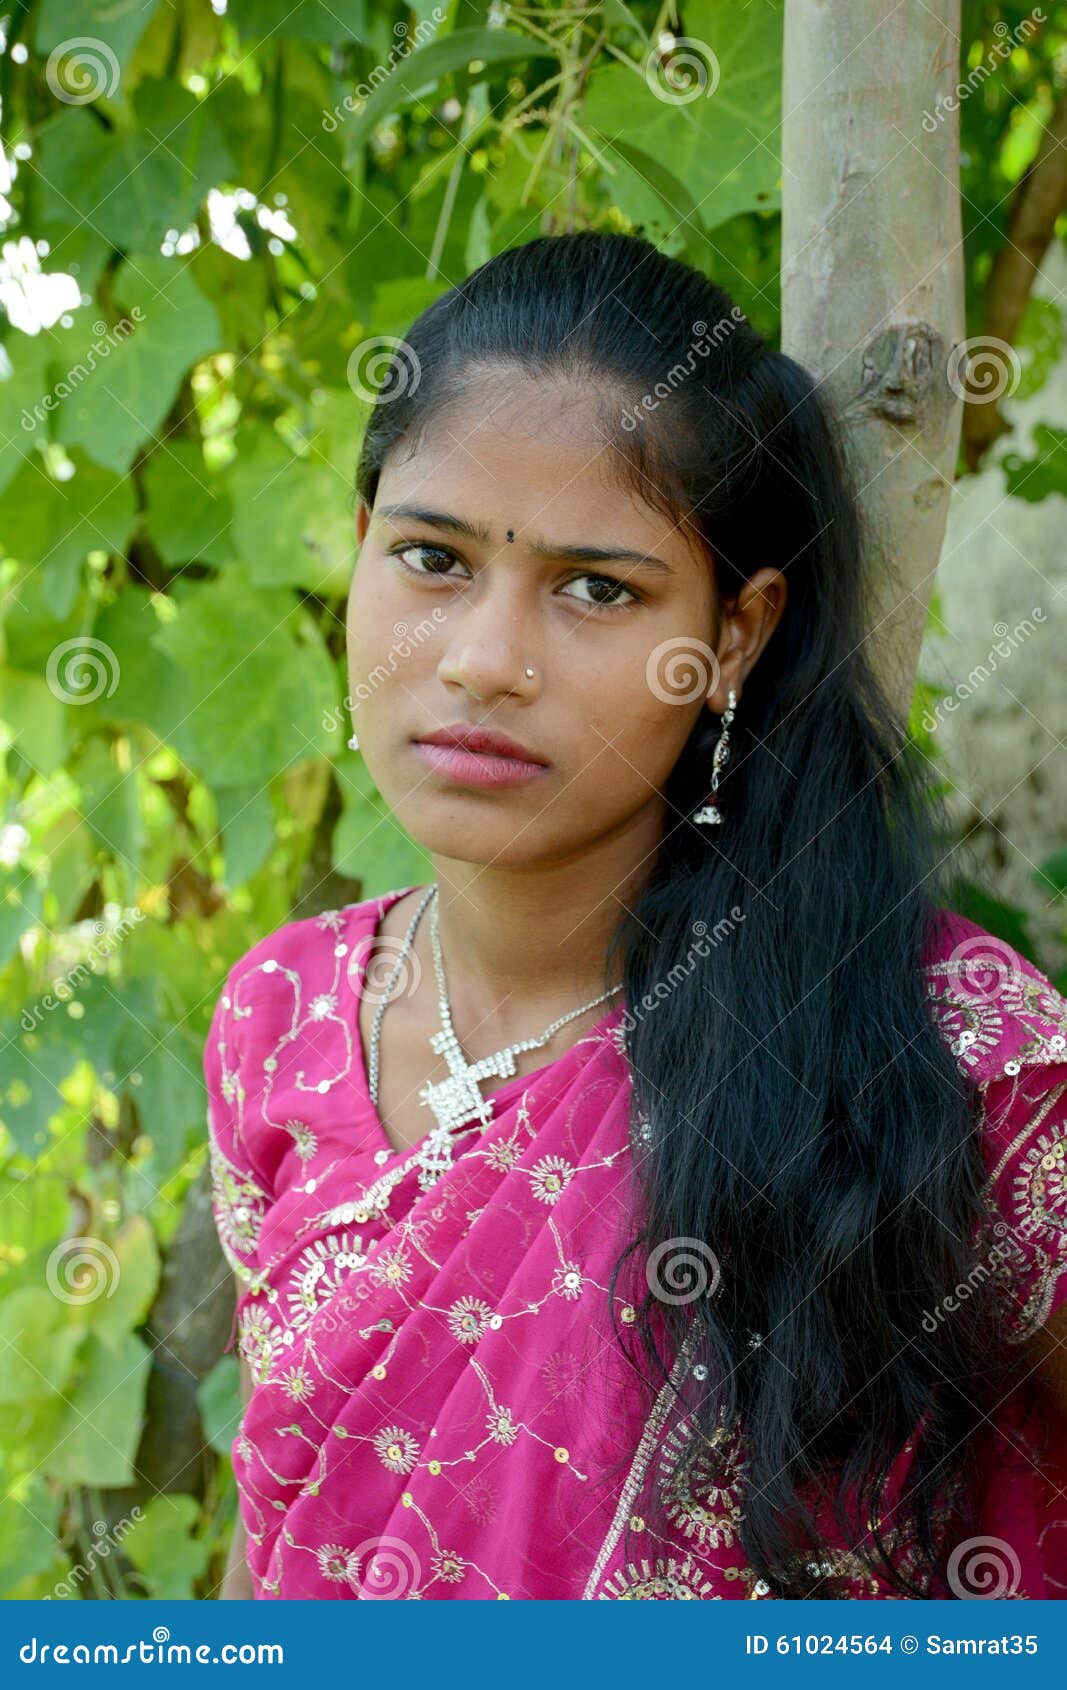 Early Marriage editorial stock image. Image of adolescent - 61024564